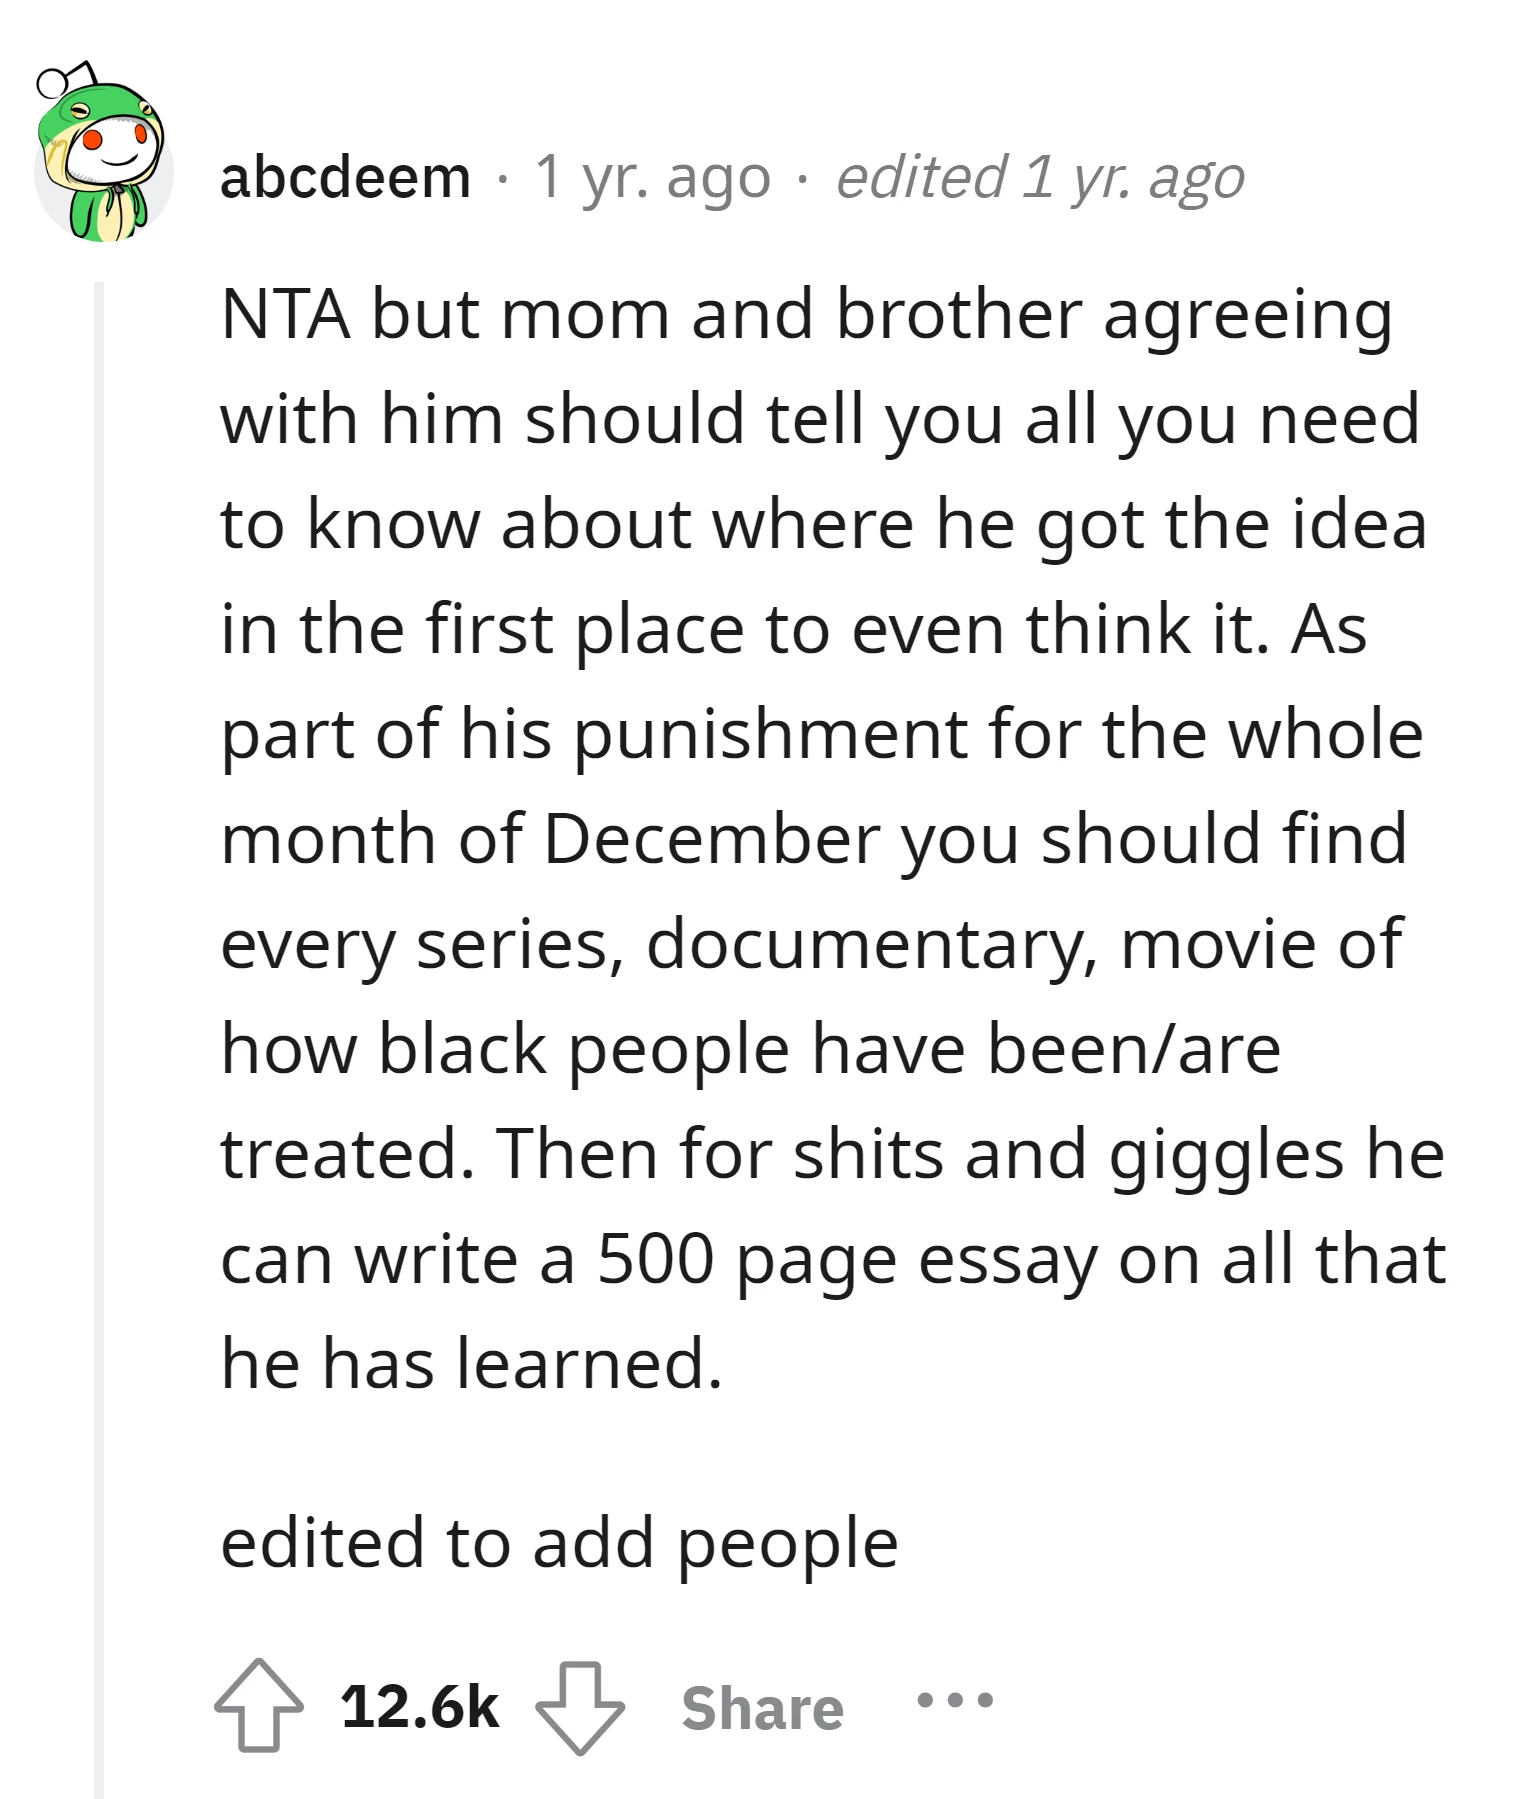 OP should teach his son about how black people have been treated